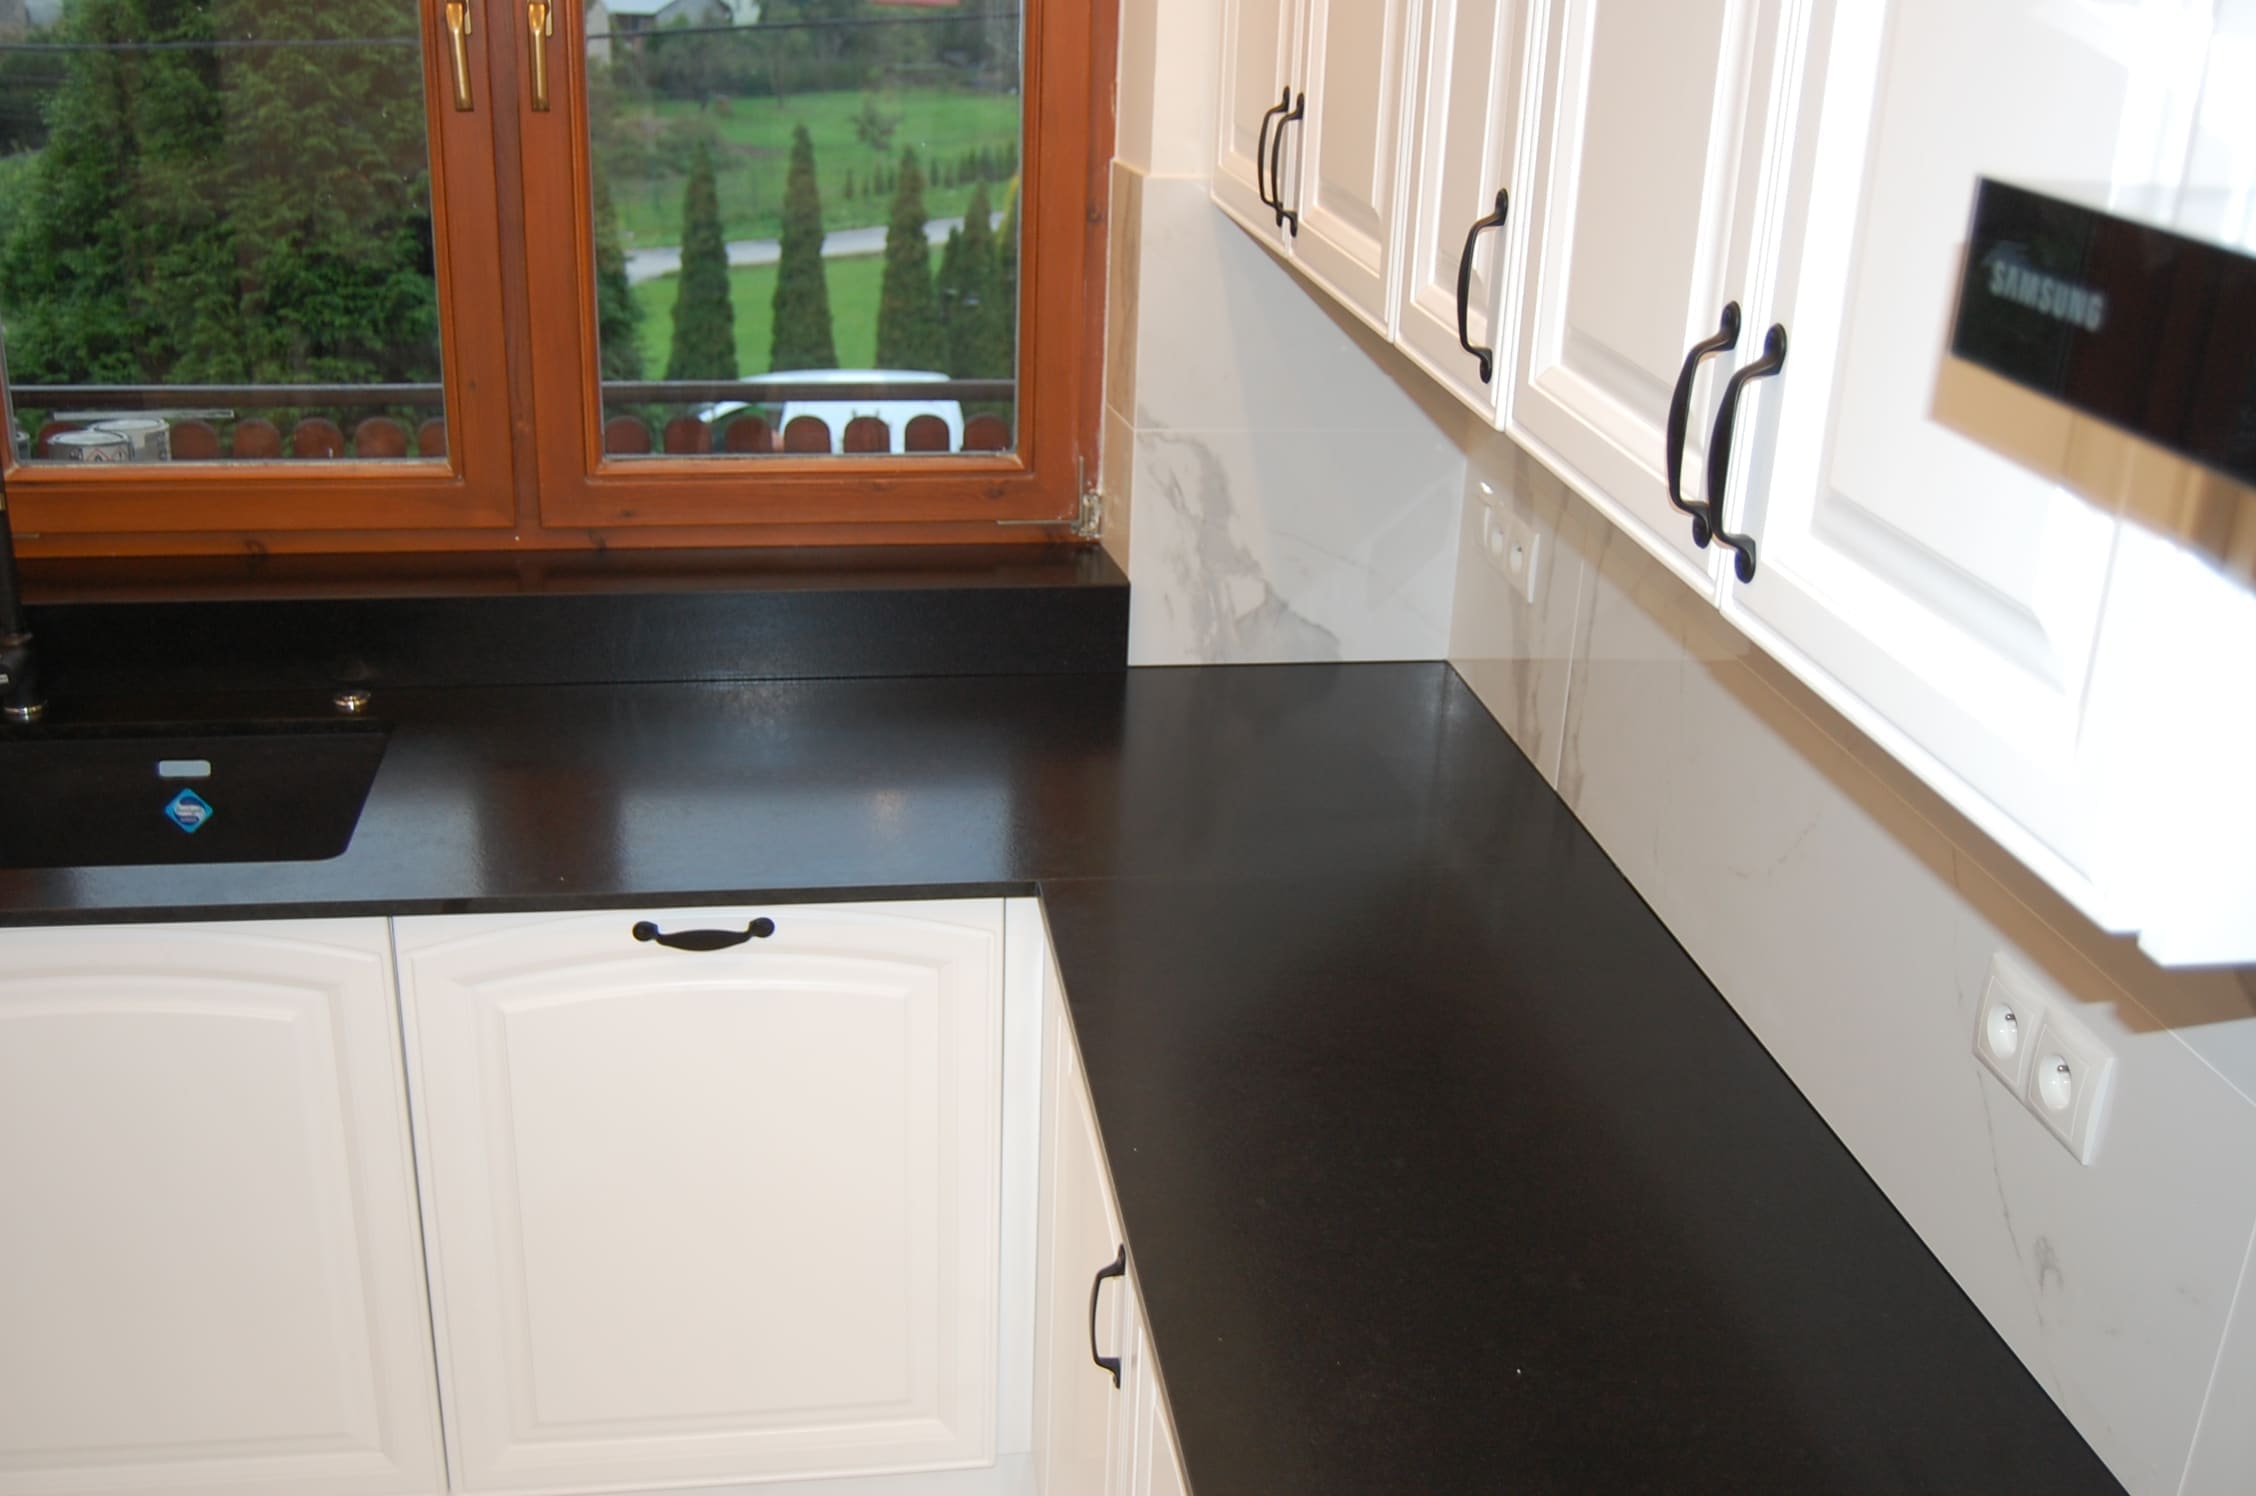 What to pay attention to when buying a kitchen worktop? – Fainner